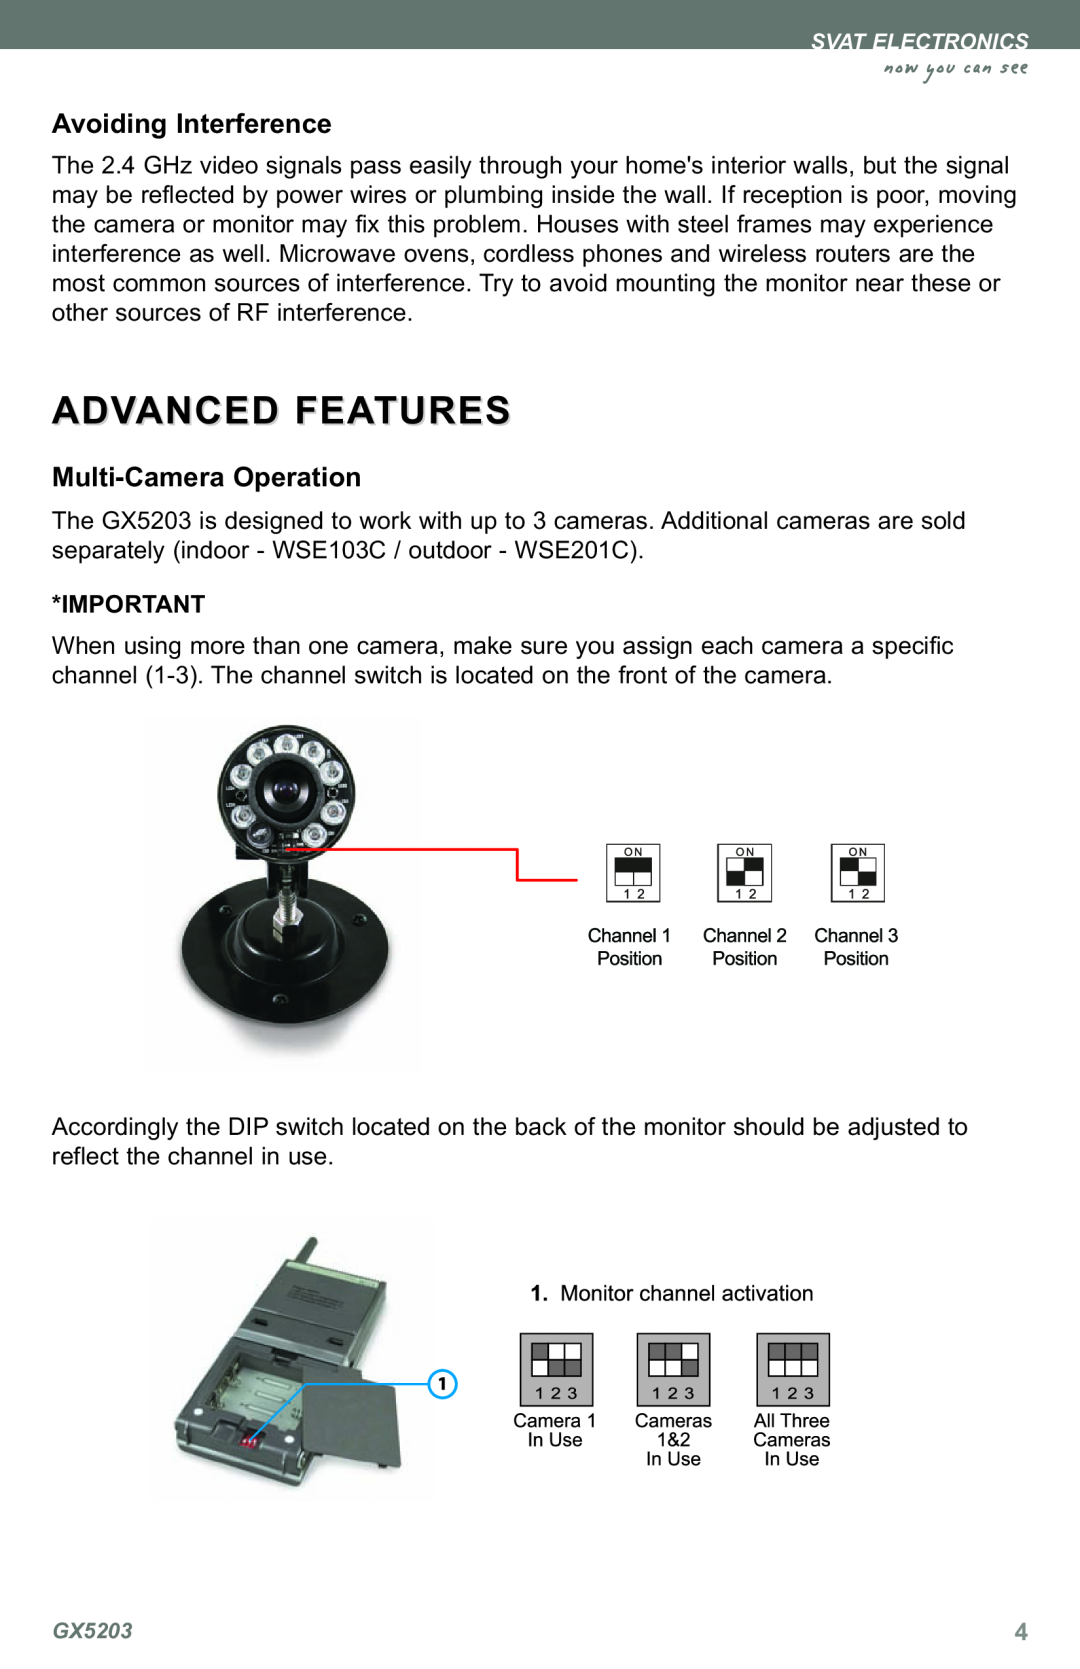 SVAT Electronics GX5203 instruction manual Advanced Features, Avoiding Interference, Multi-CameraOperation 